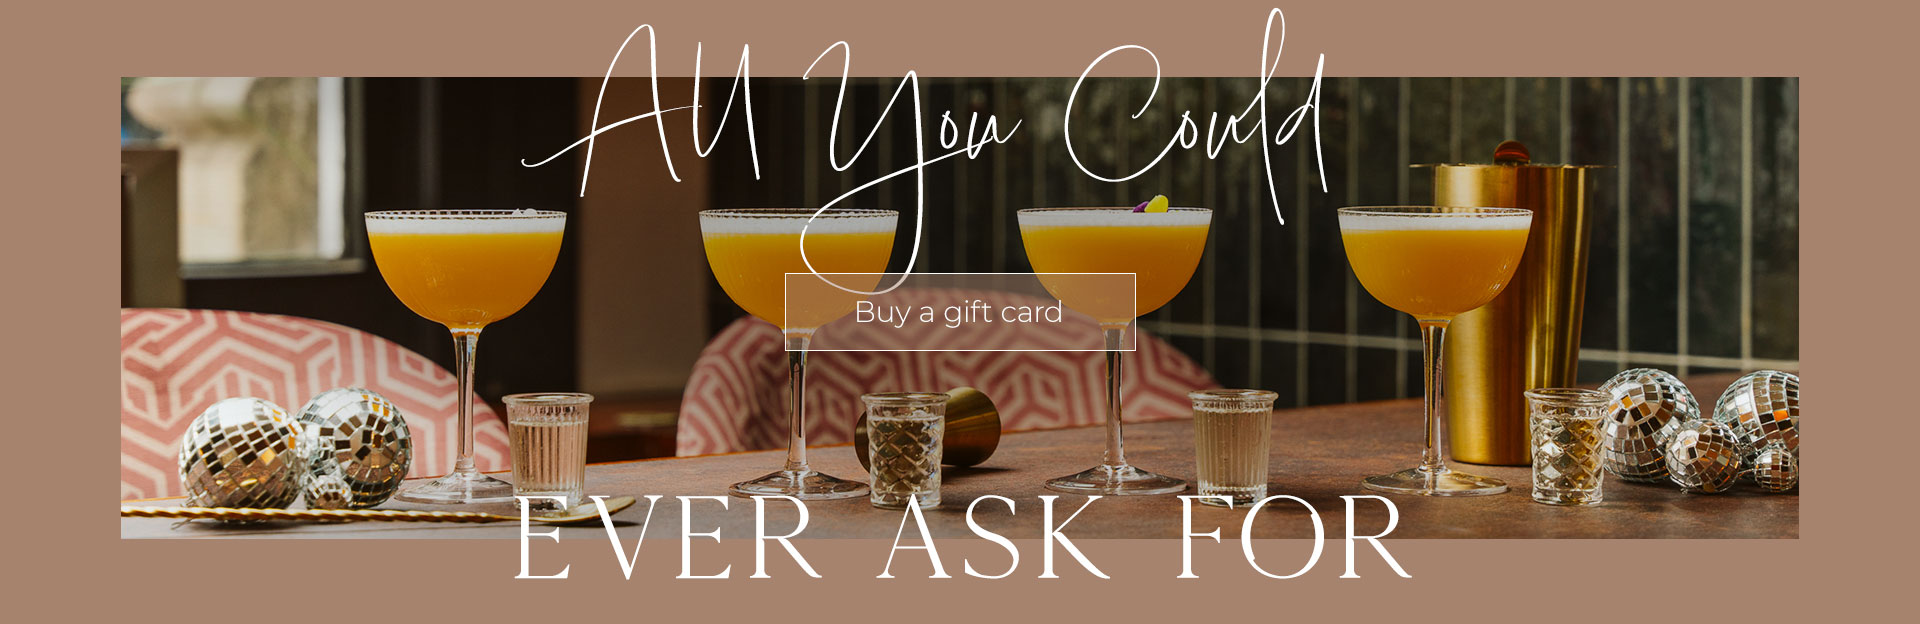 All Bar One Gift Cards at All Bar One Leicester Square